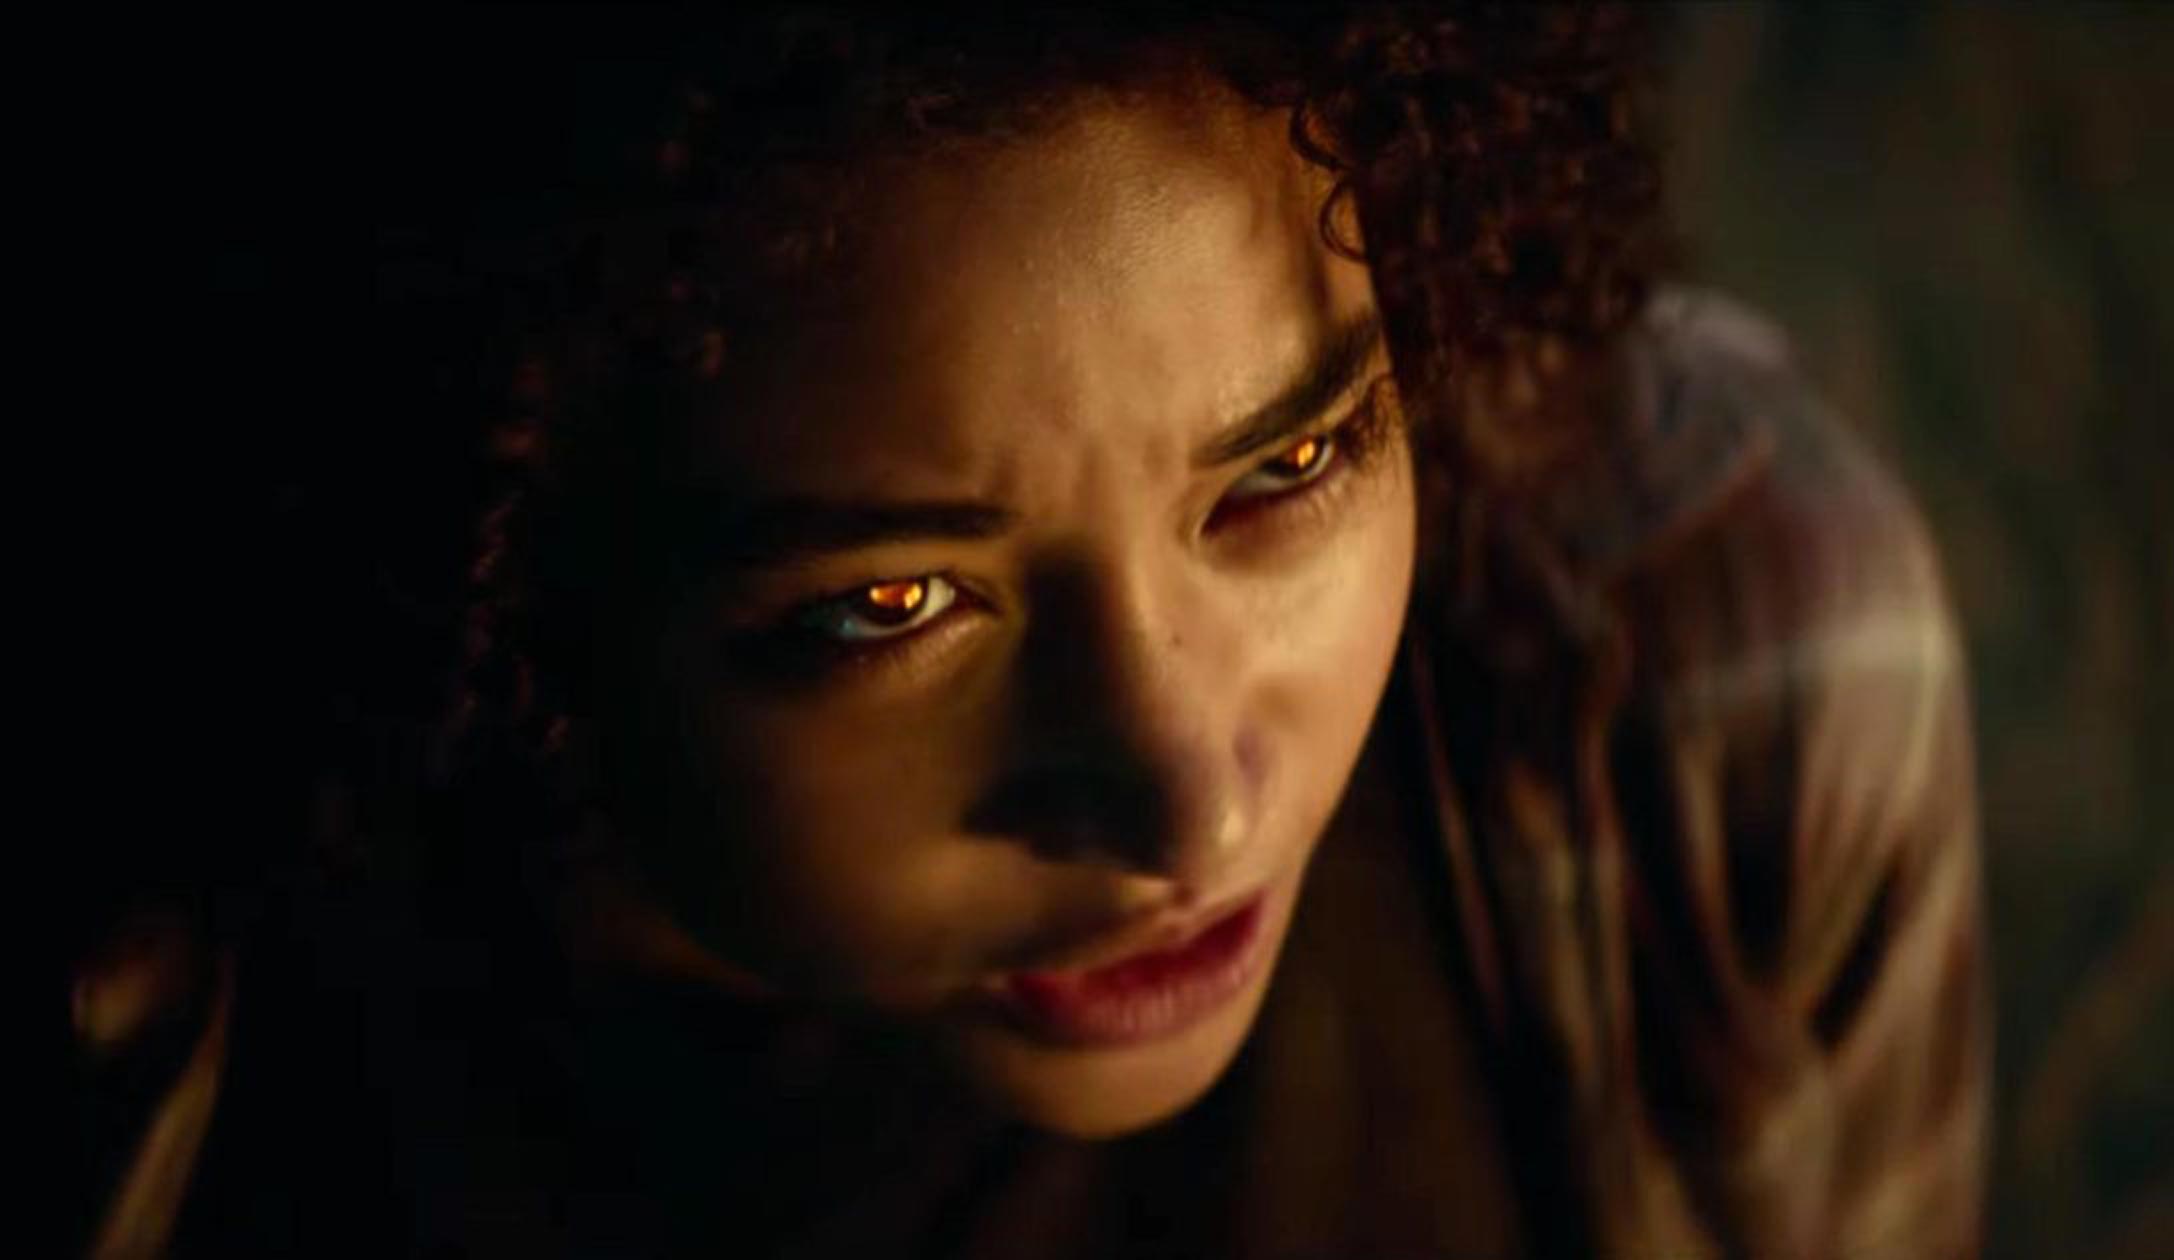 Sci-Fi Thriller 'The Darkest Minds' First Trailer Mashes 'The Hunger Games' And 'X-Men'